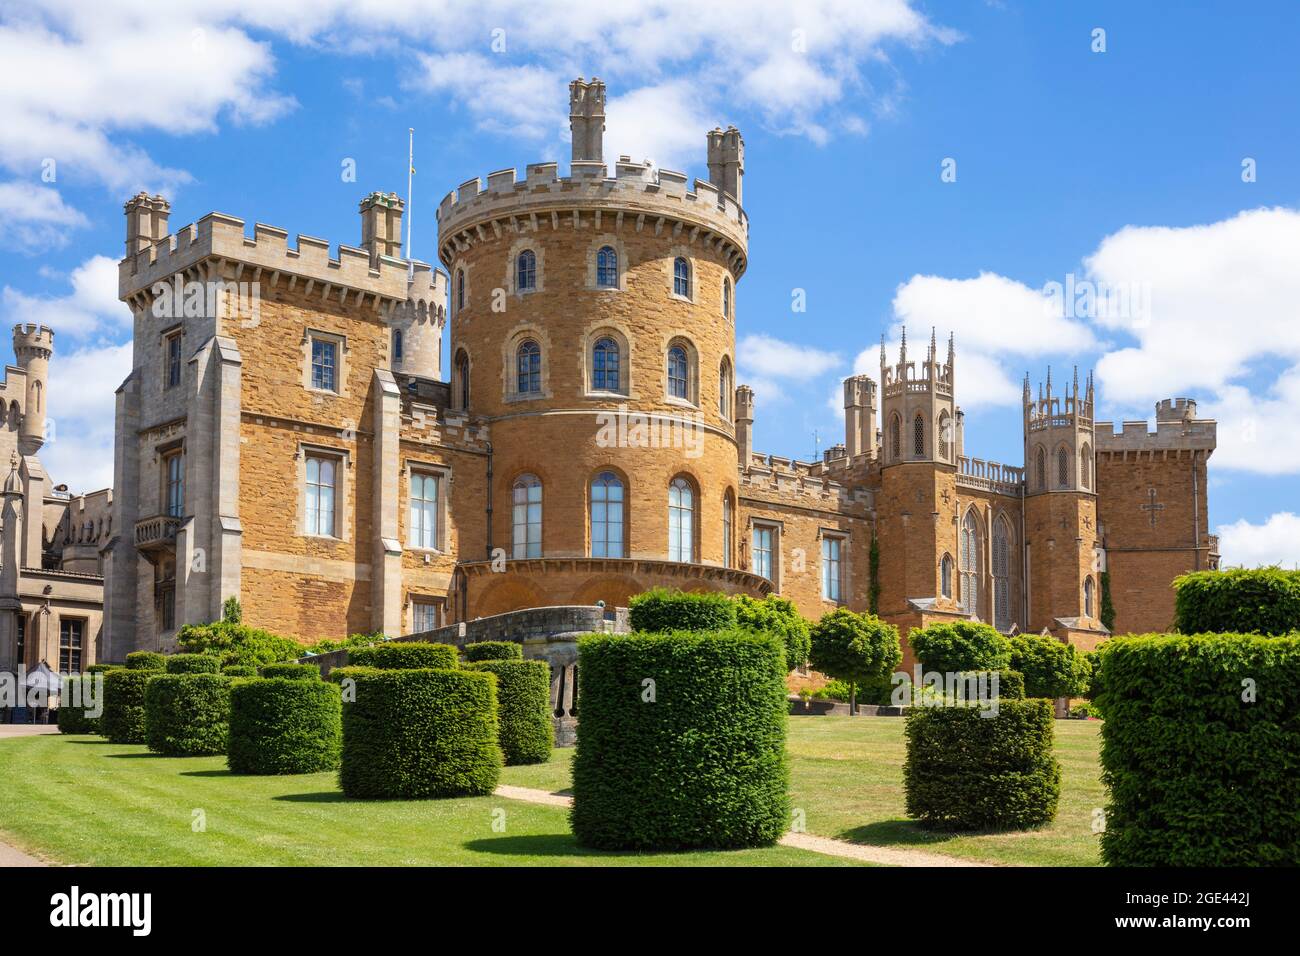 Belvoir Castle in the Vale of Belvoir Grantham Leicestershire England UK GB Europe Stock Photo